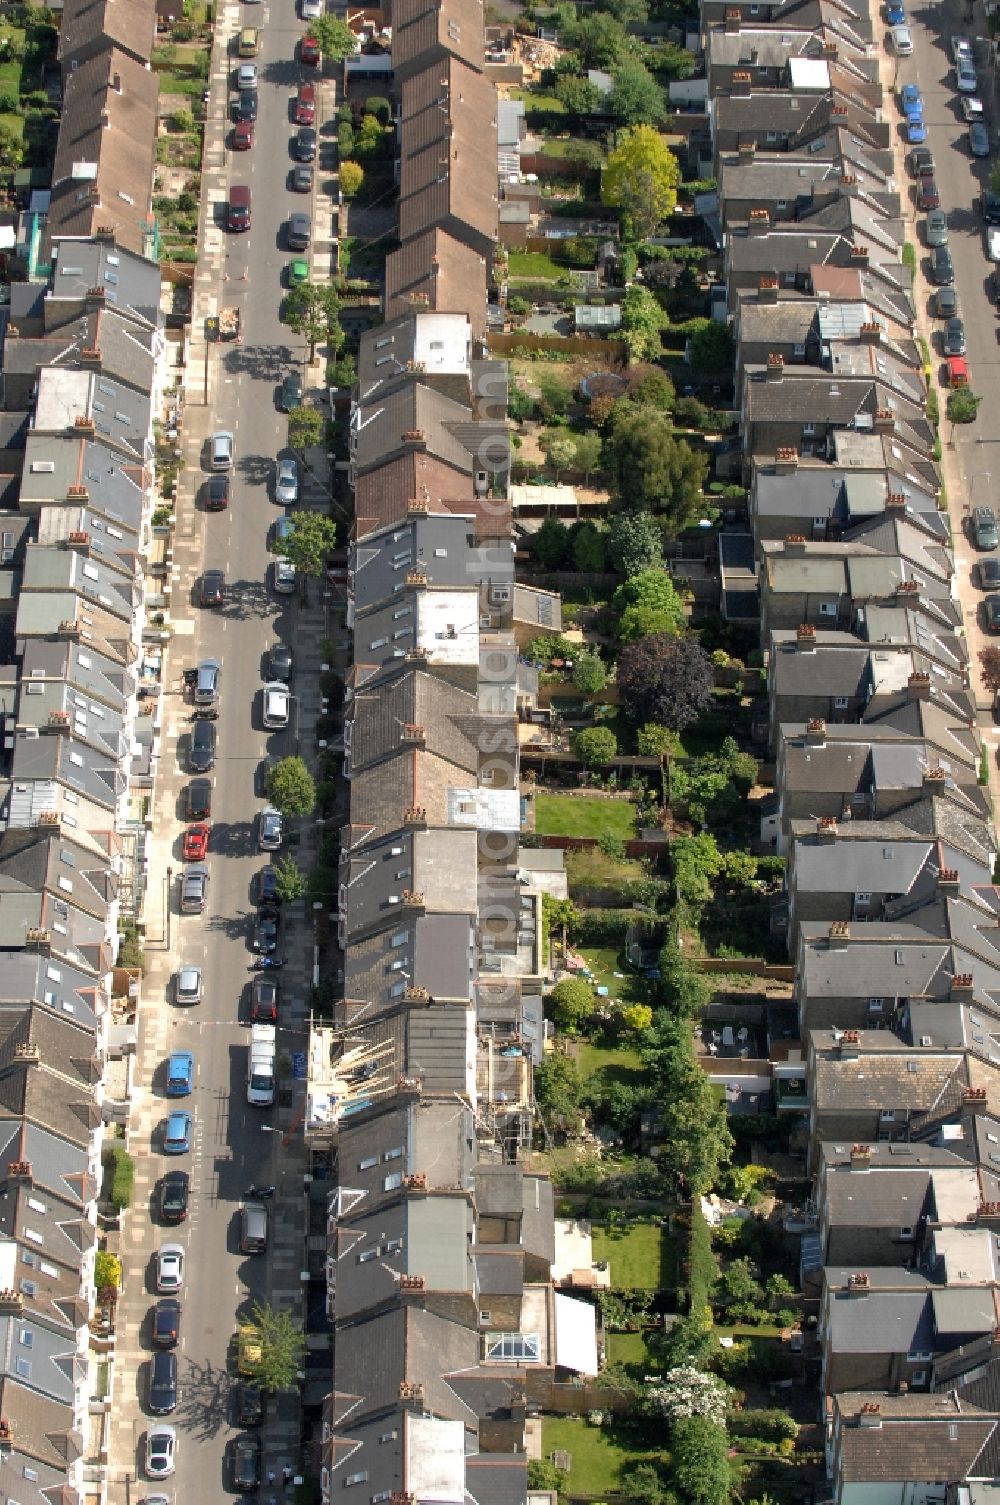 Aerial image London - 20/06/2012 LONDON city view from London on Wimbledon Park residential area, the typical British home series between settlements arose at the Merton Rd, Brookwood Rd, Revelstoke Road in the 70s